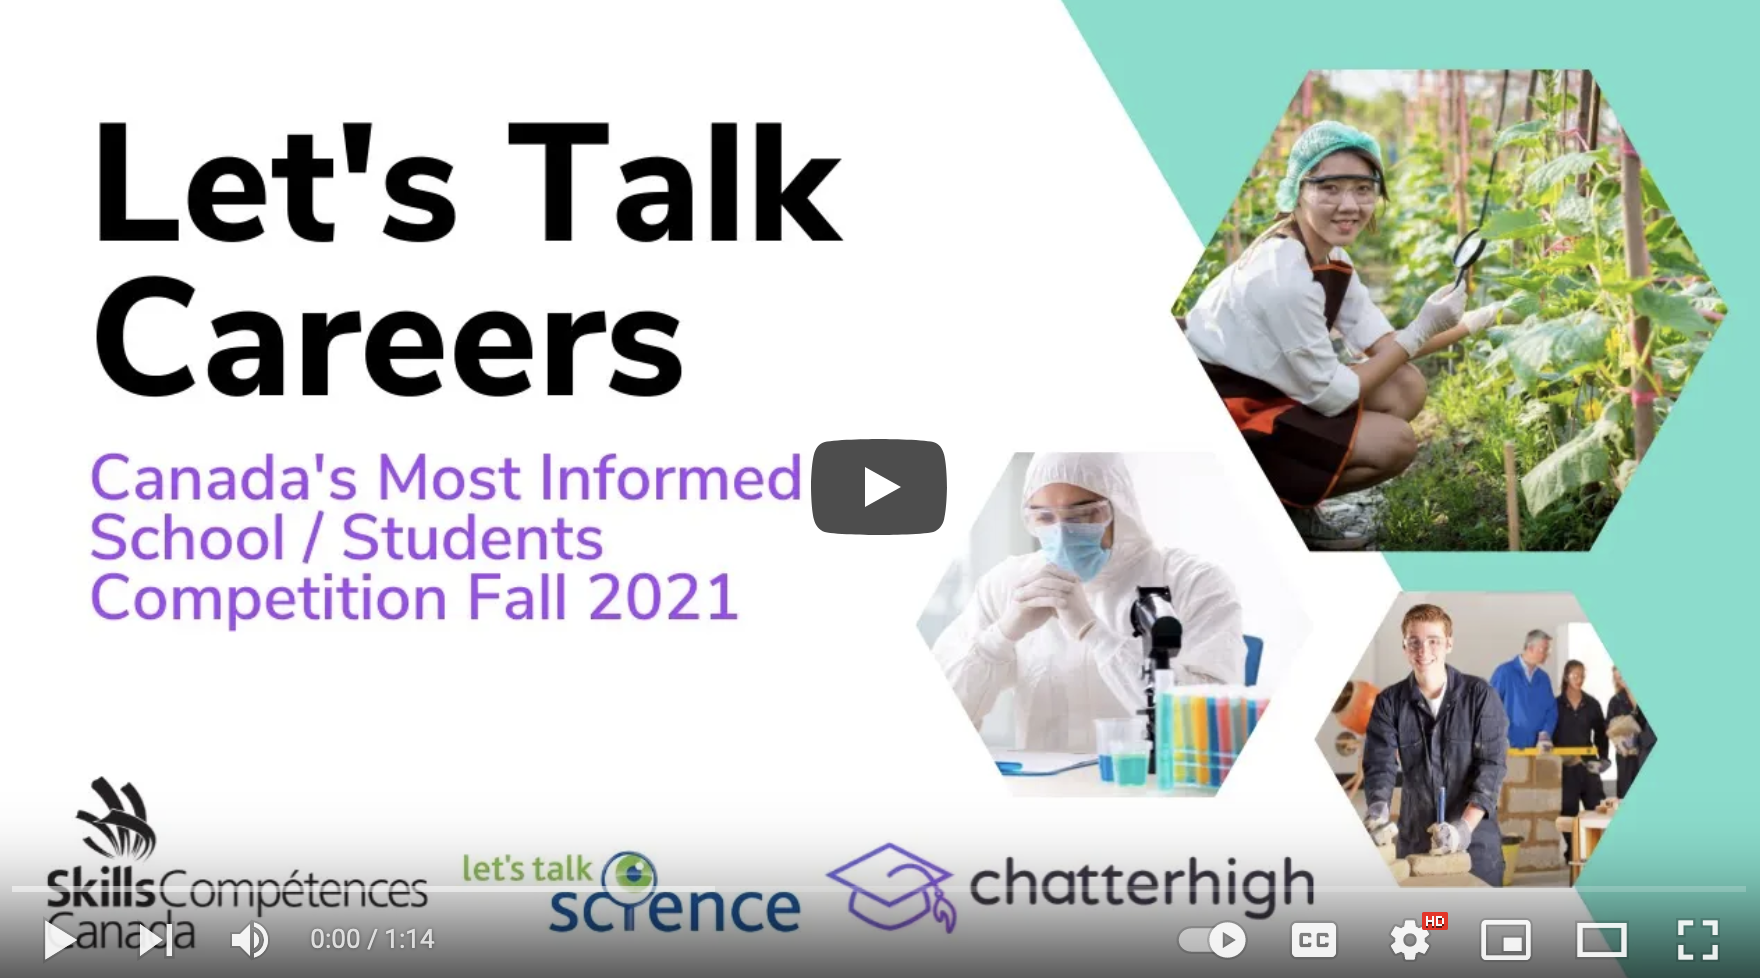 Video on Let’s Talk Careers Competition, Fall 2021 Edition